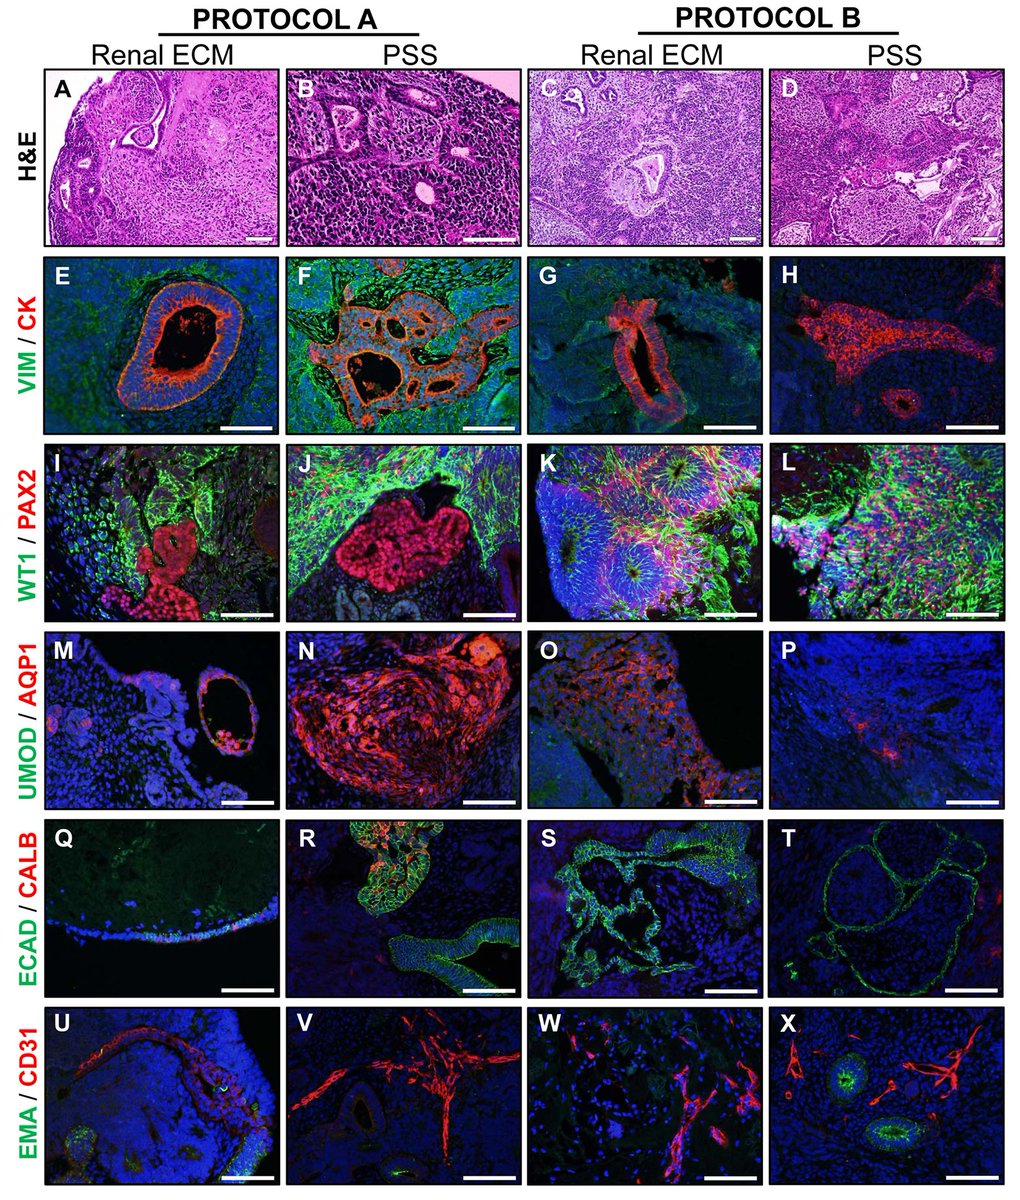 Do you know that #ALI conditions are a common feature for a succesful #celldifferentiation of #hIPSc #kidney #organoids? Oxygen tension seems to play a key role in the process. We love this topic! Learn more about it in this article from Batchelder et al: journals.plos.org/plosone/articl…